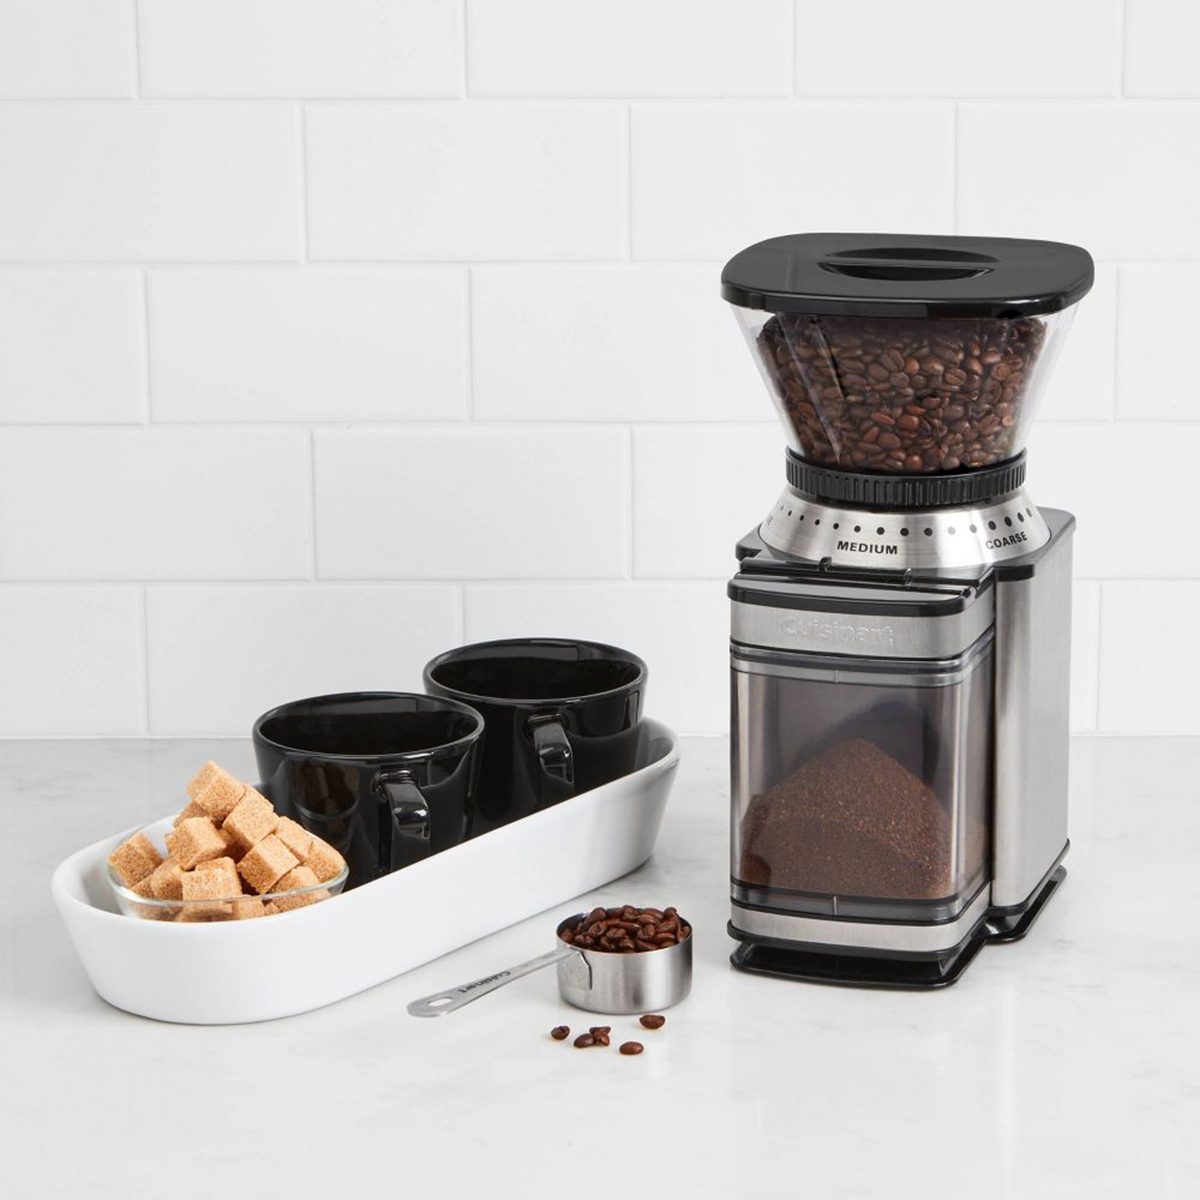 Key Essentials For Your Home Coffee Bar – The Artisan Barista